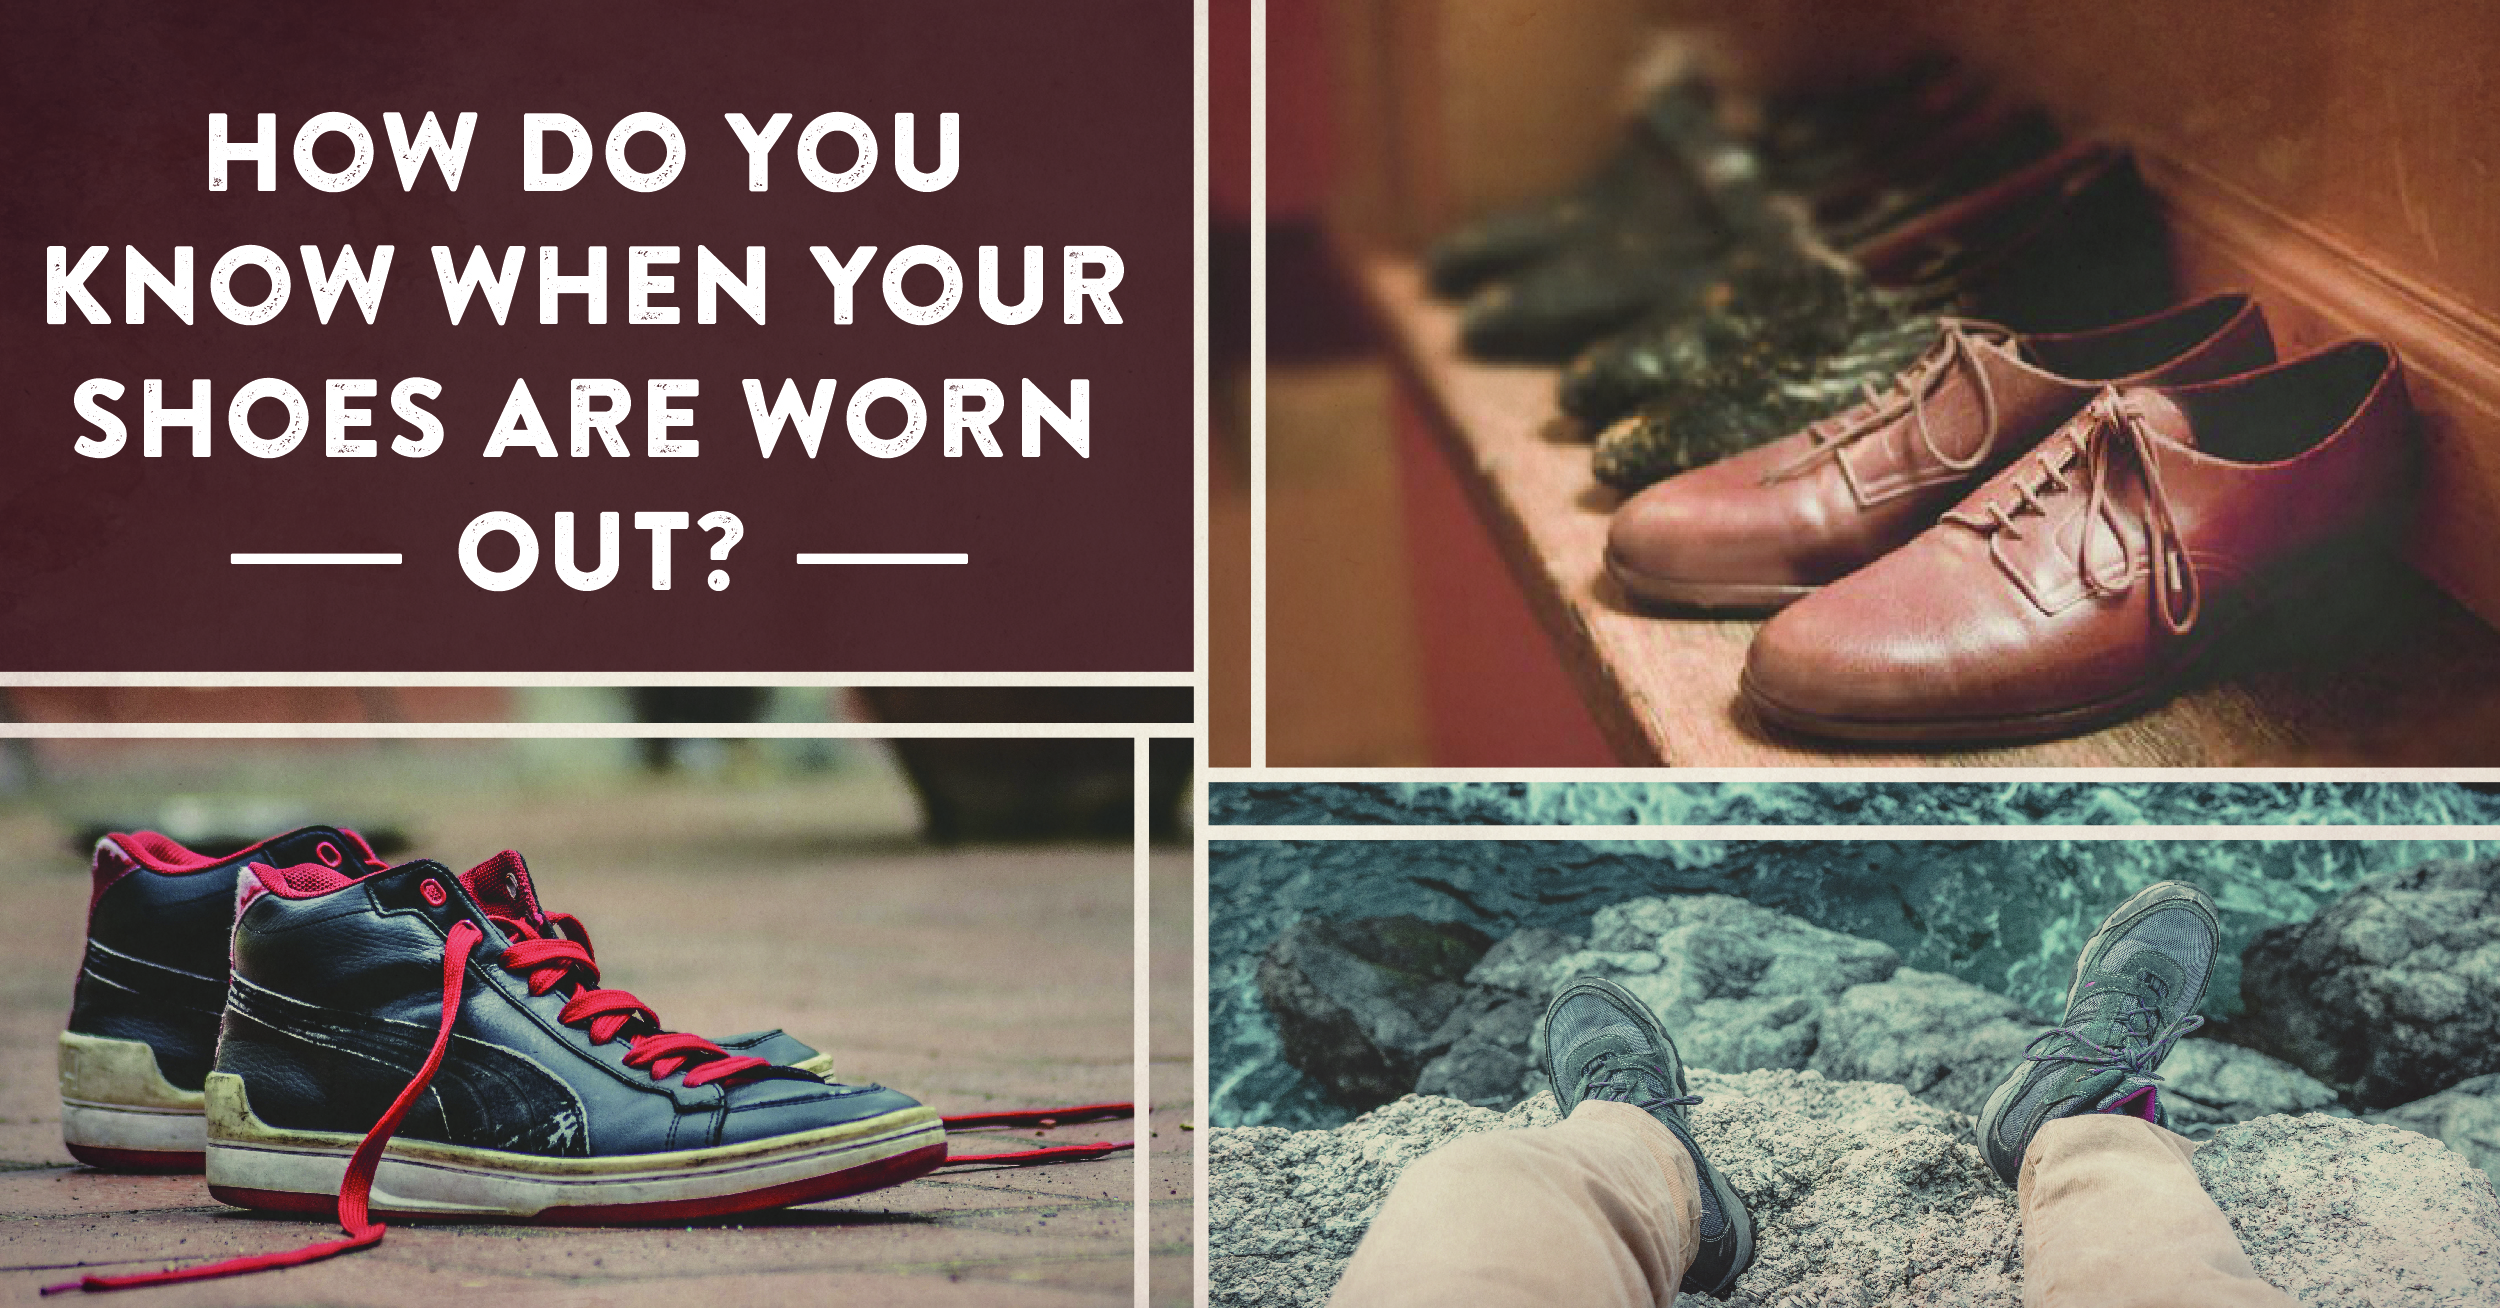 How Do You Know When Your Shoes Are Worn Out?